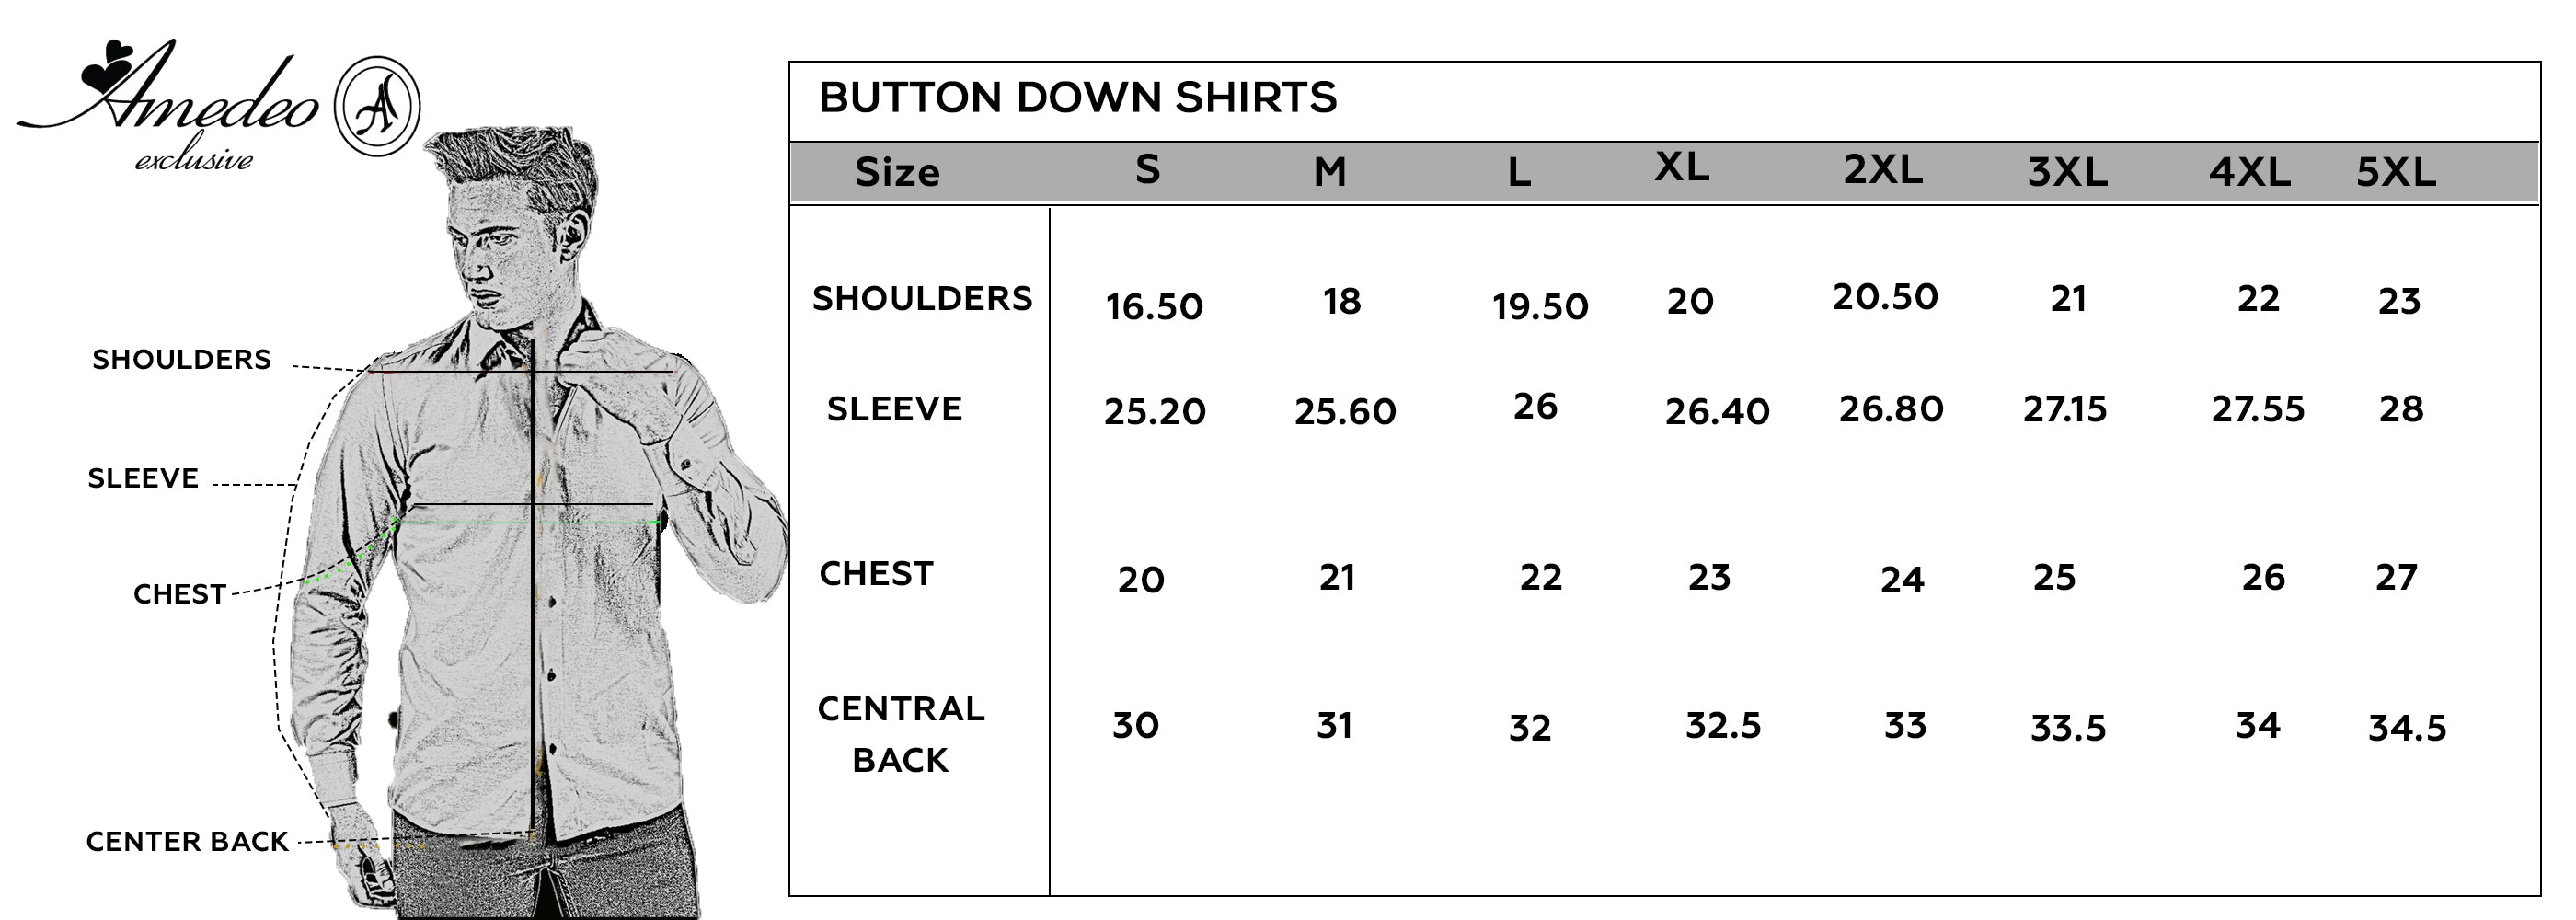 Tan Black White Mens Slim Fit Designer Dress Shirt - tailored Cotton Shirts for Work and Casual Wear